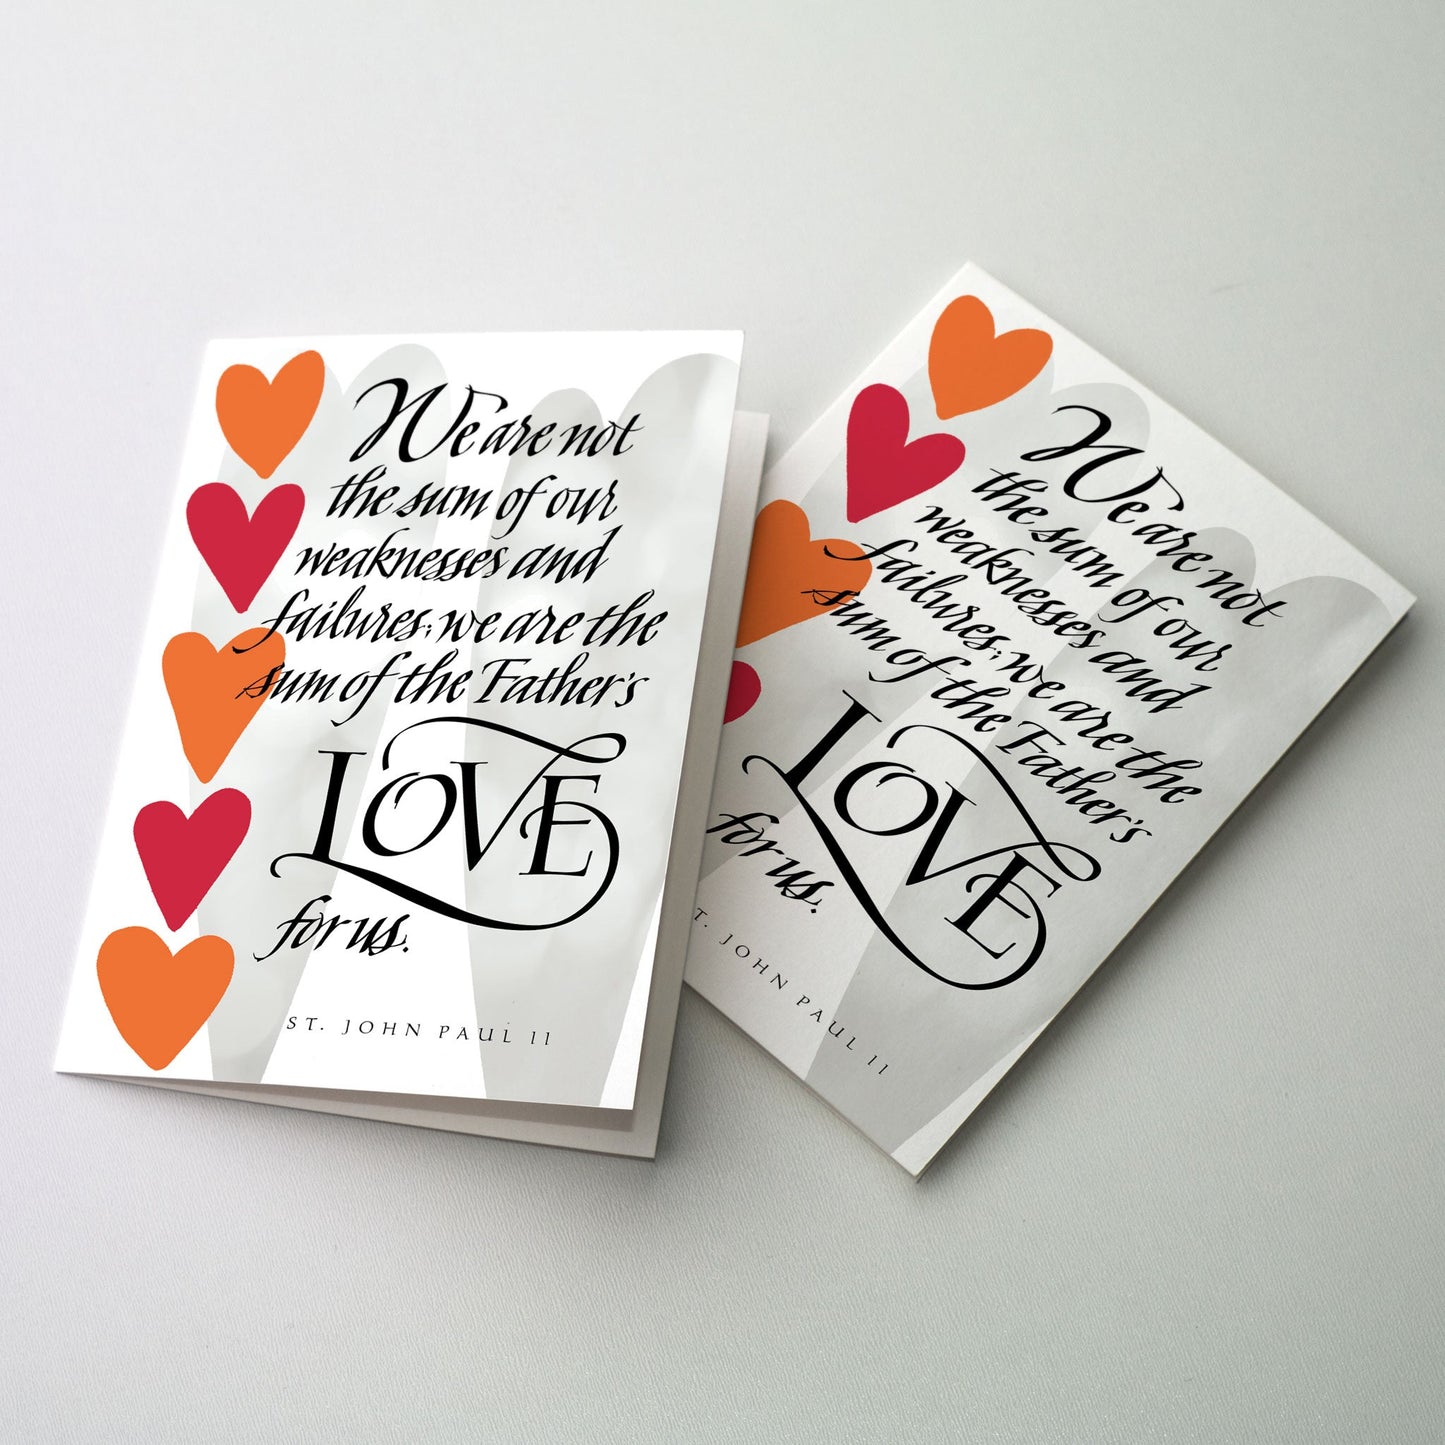 gray, orange, and red hearts with black calligraphy